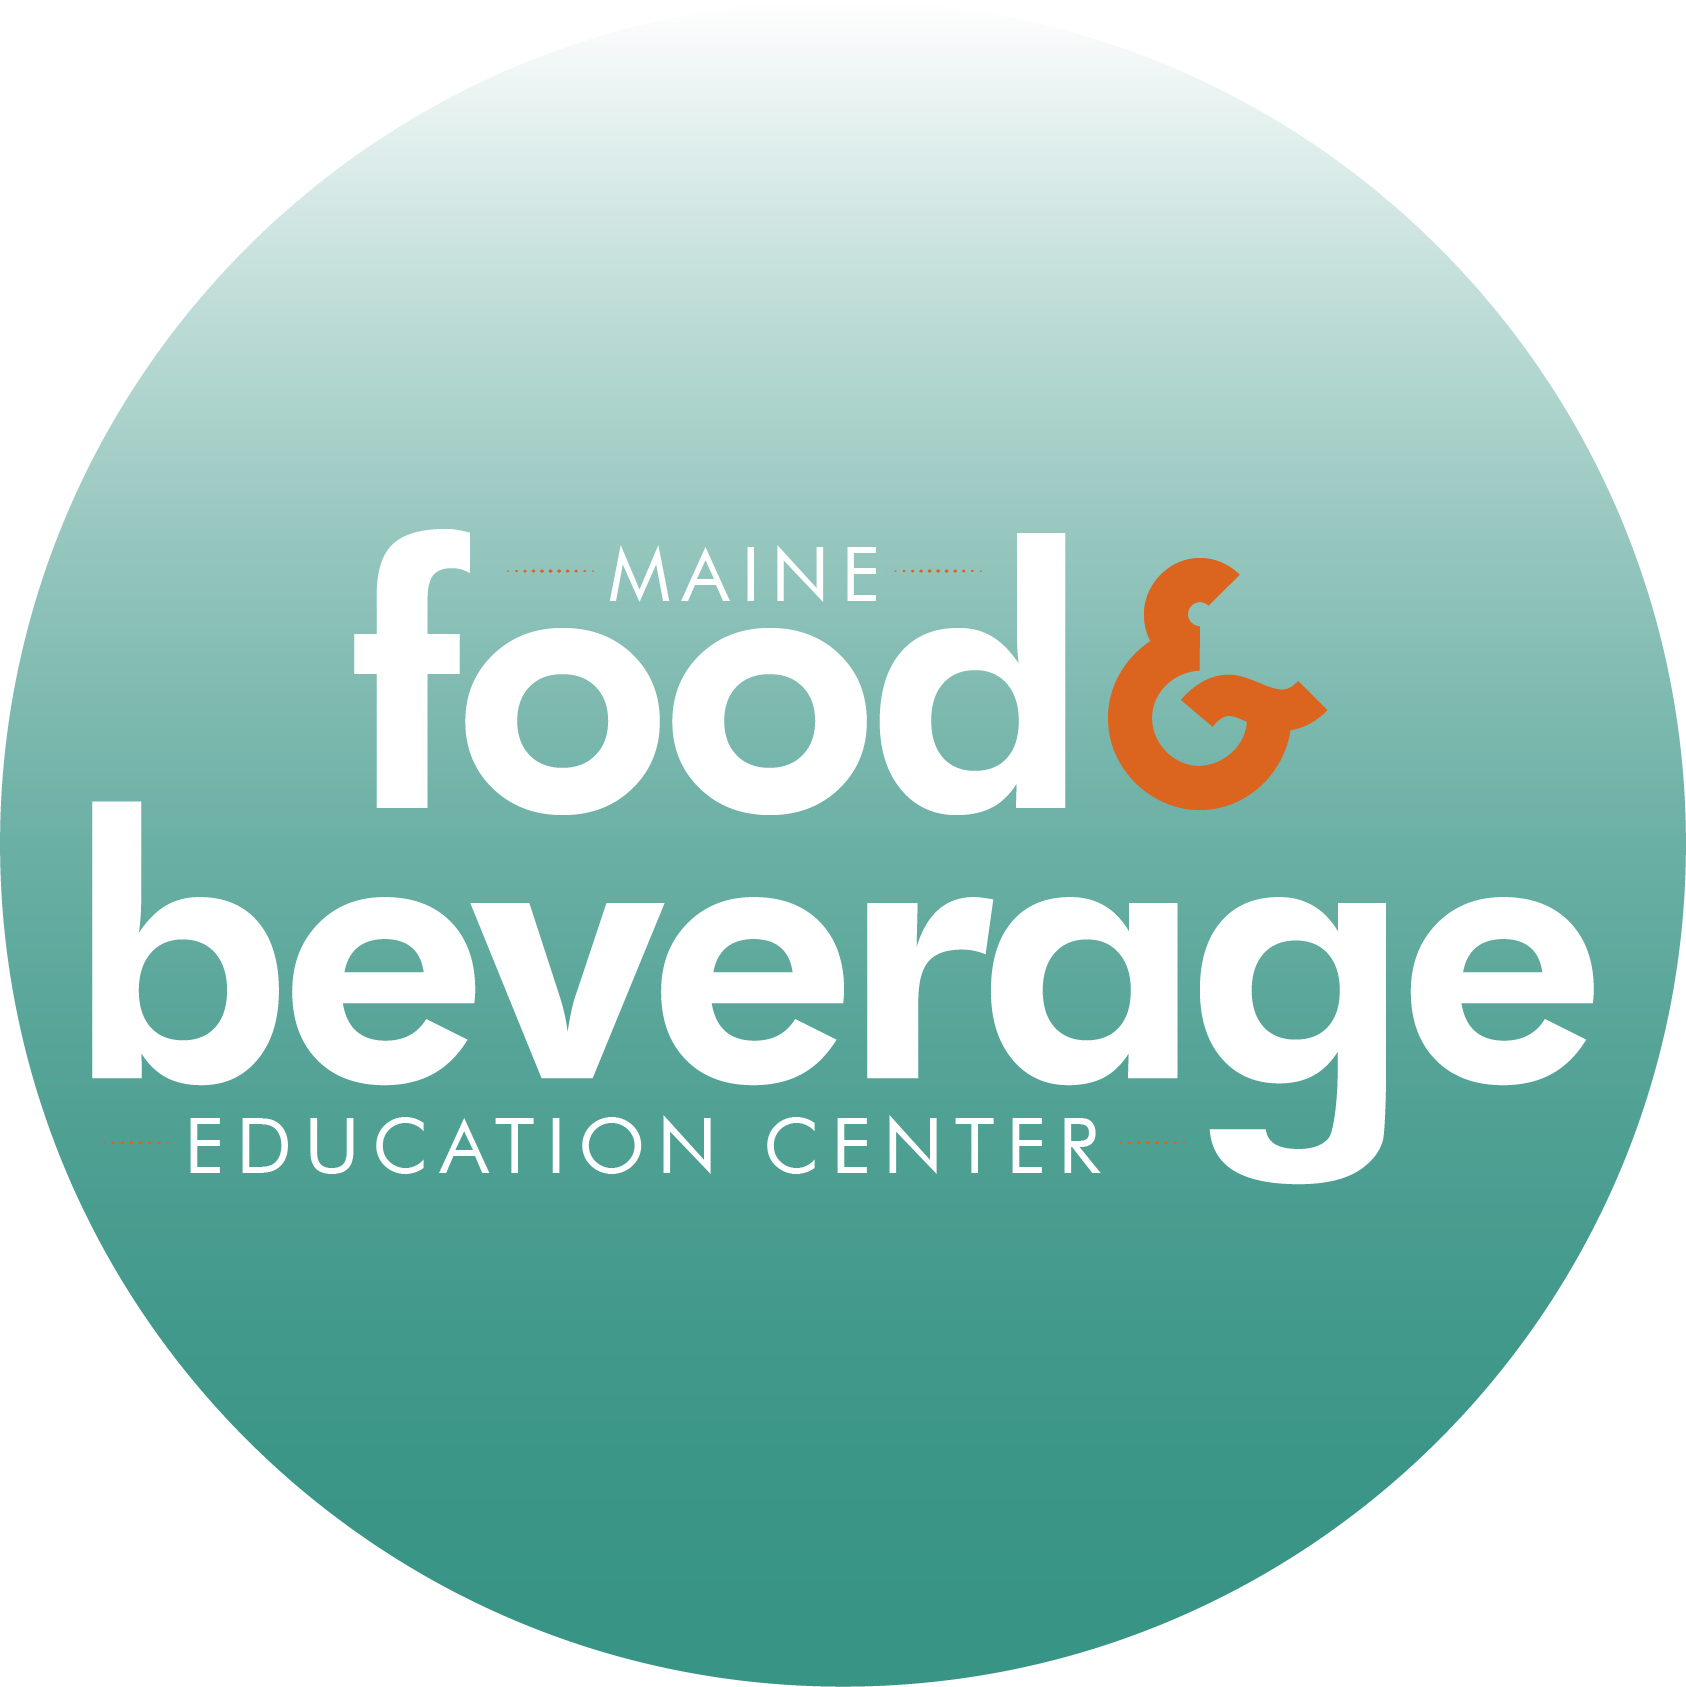 Maine Food and Beverage Education Center logo